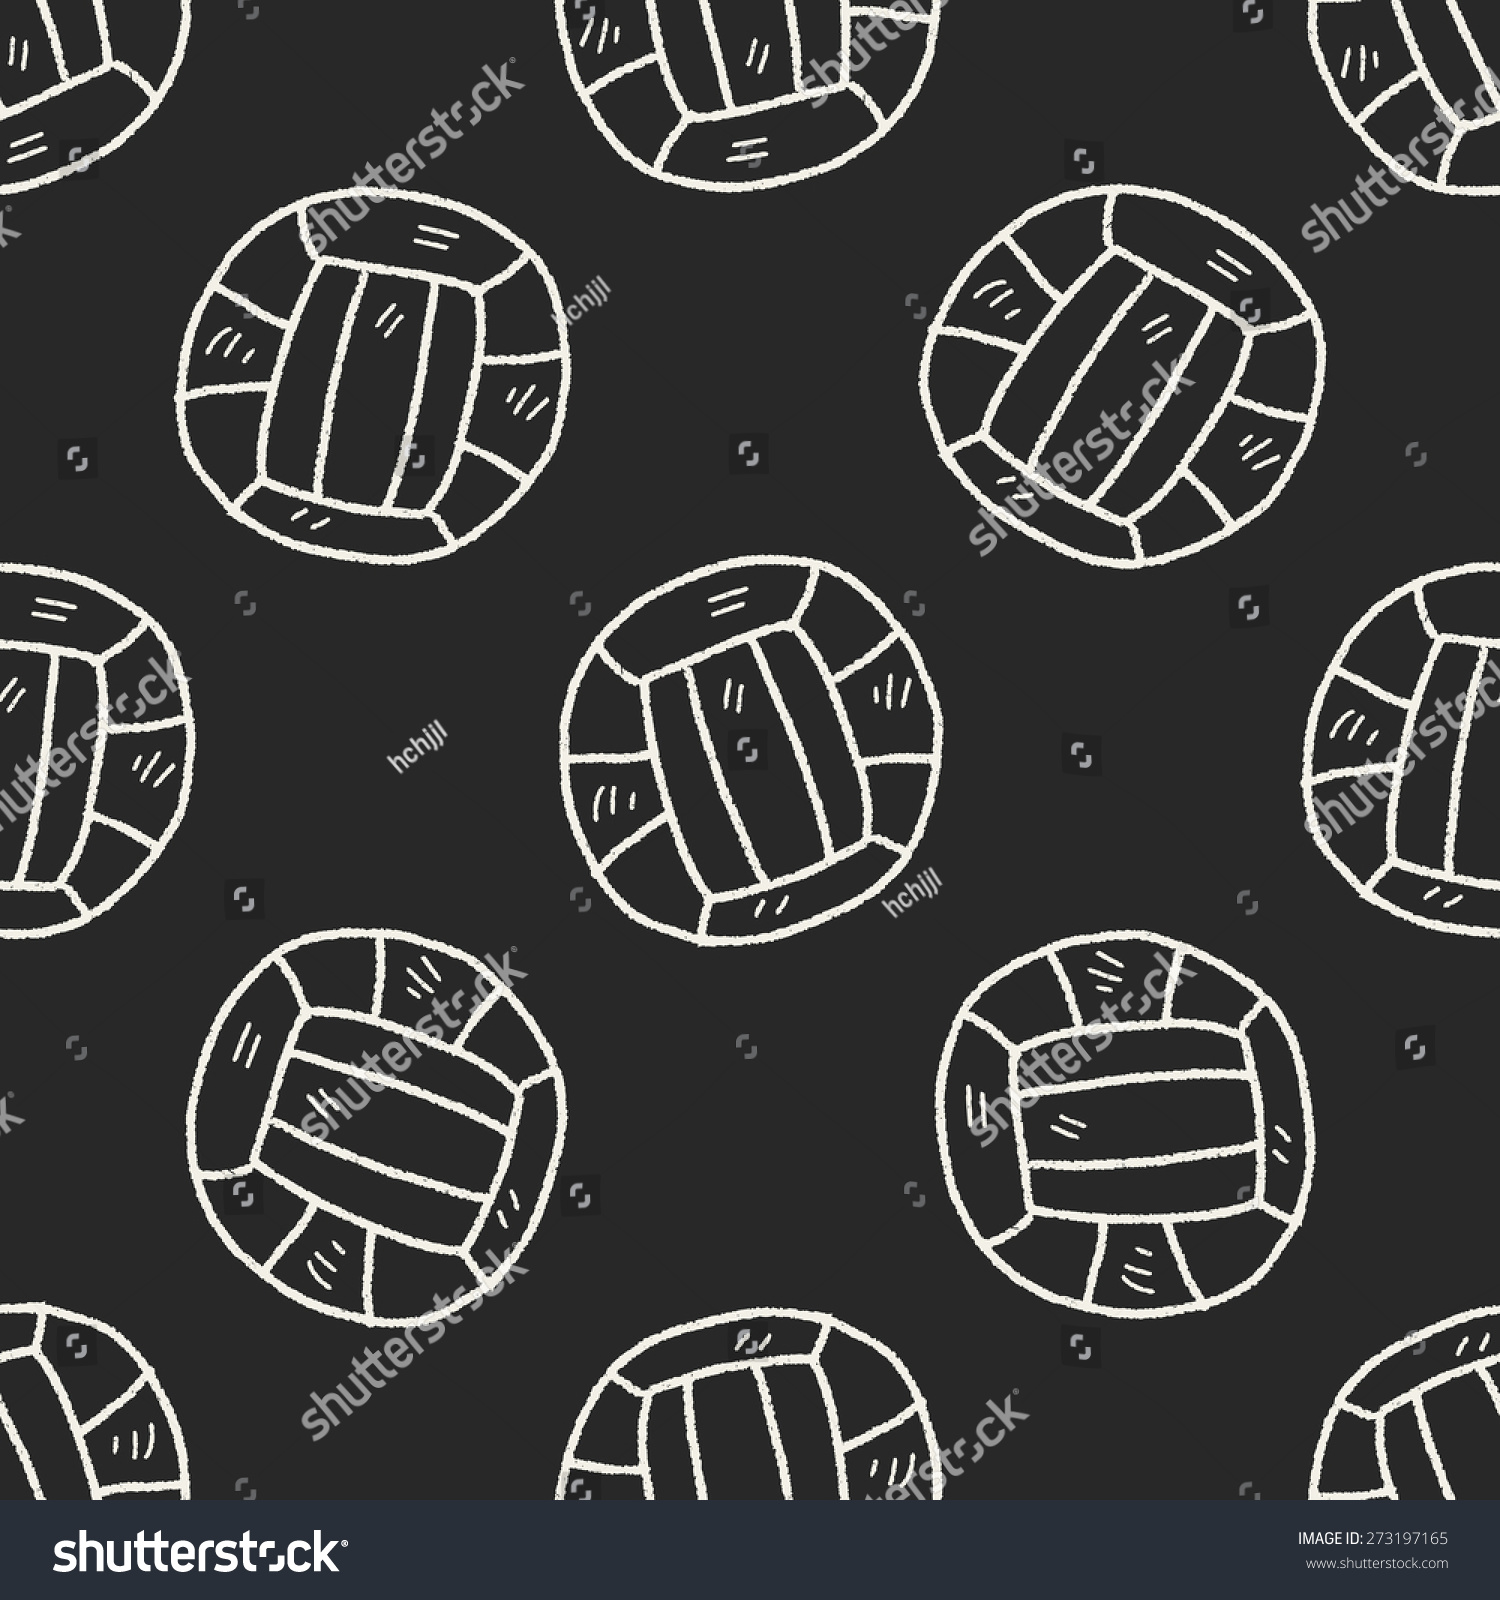 Volleyball Doodle Seamless Pattern Background Stock Vector (Royalty ...